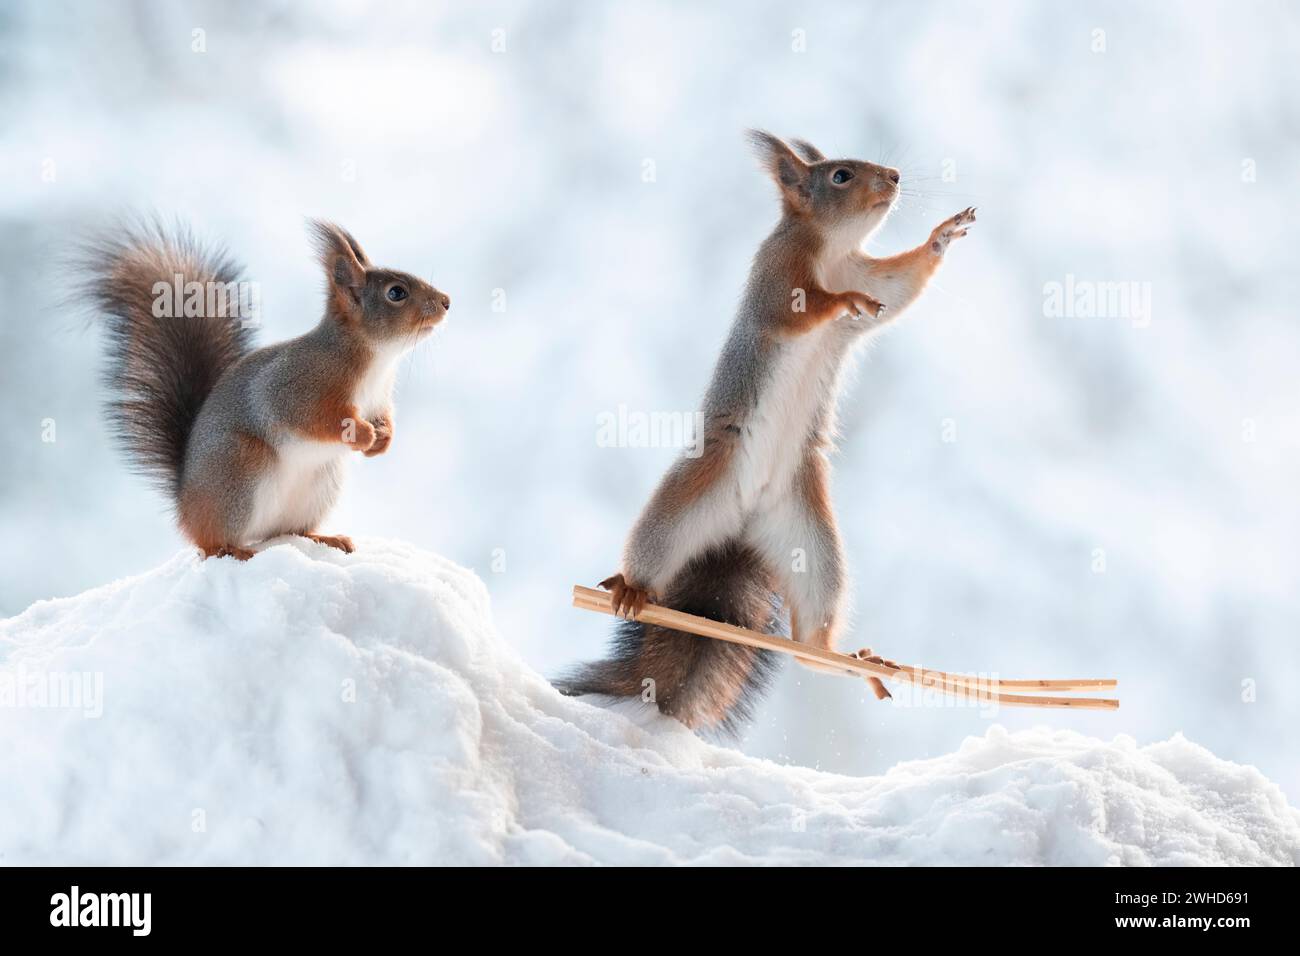 Red squirrel on skis in snow with spectator Stock Photo